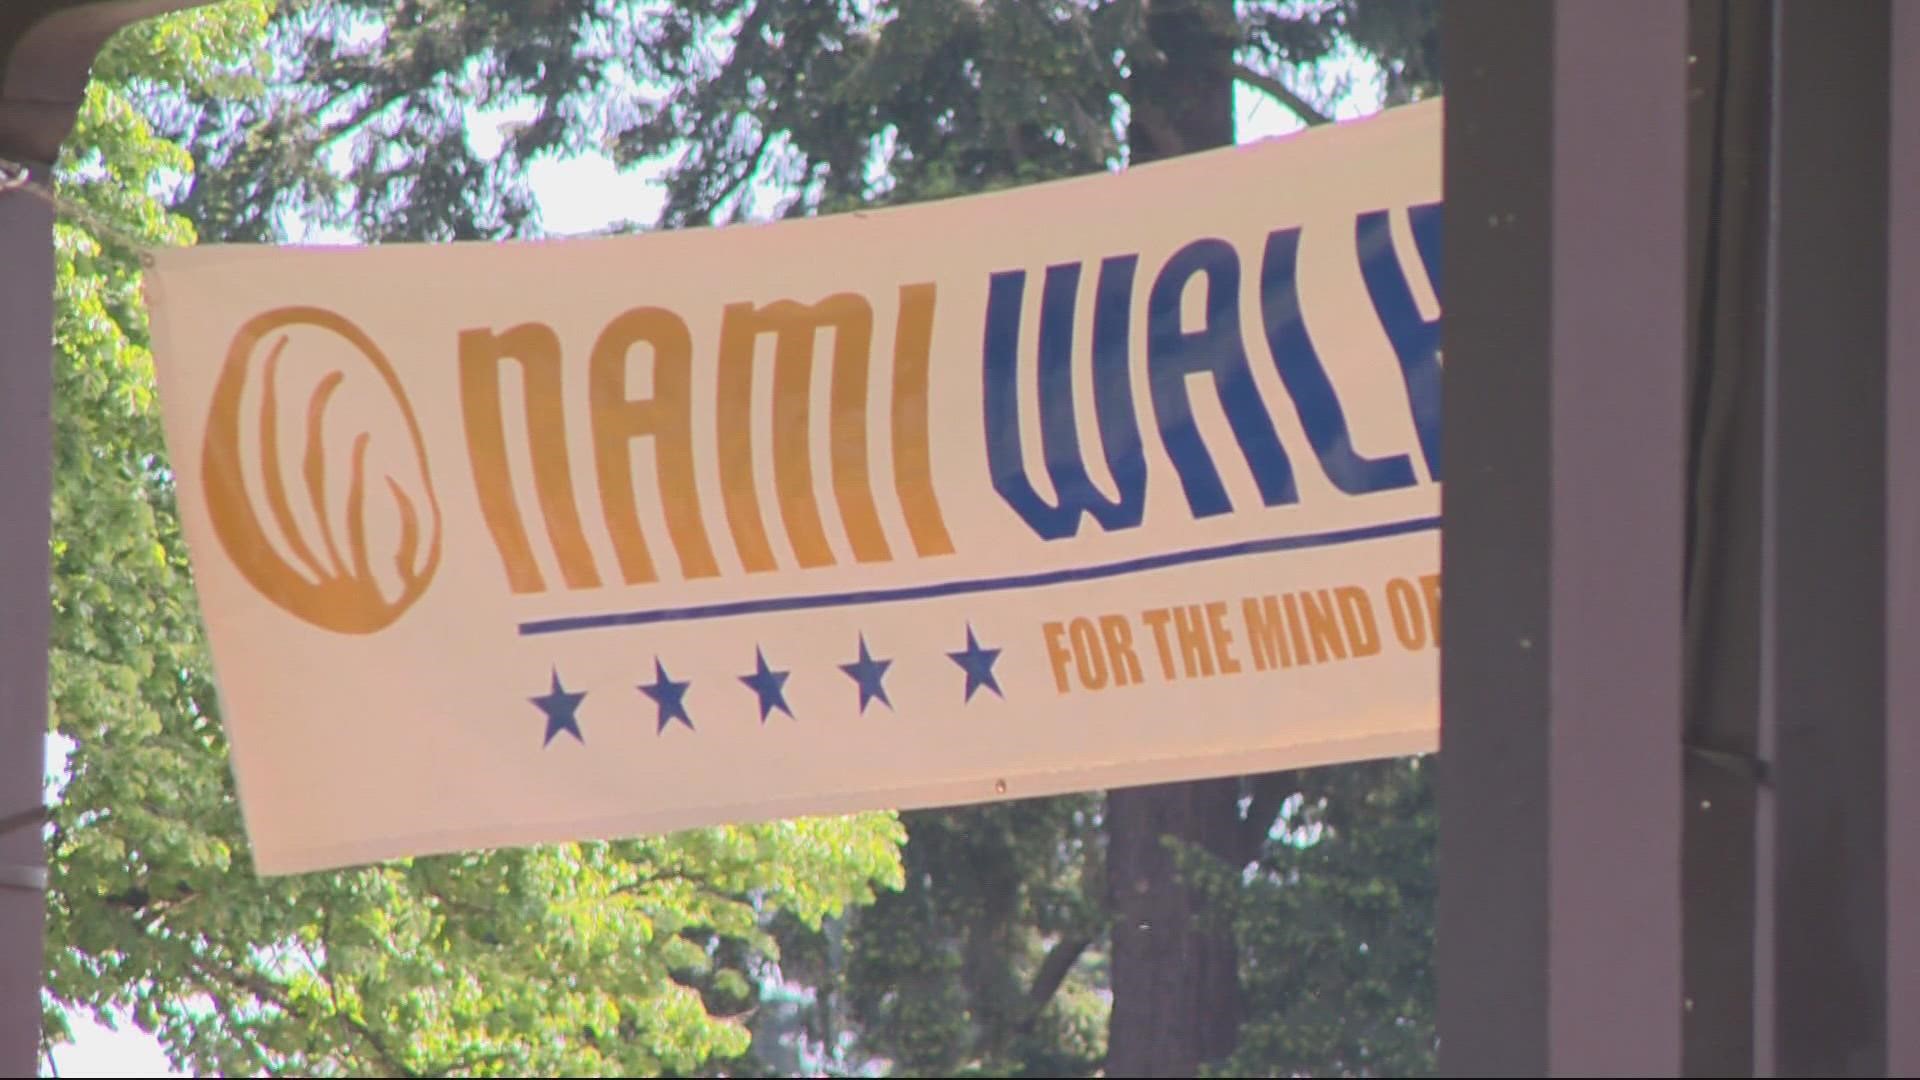 National Alliance on Mental Illness Northwest held its biggest fundraiser of the year at Peninsula Park in North Portland on Sunday. KGW's Brittany Falkers reports.